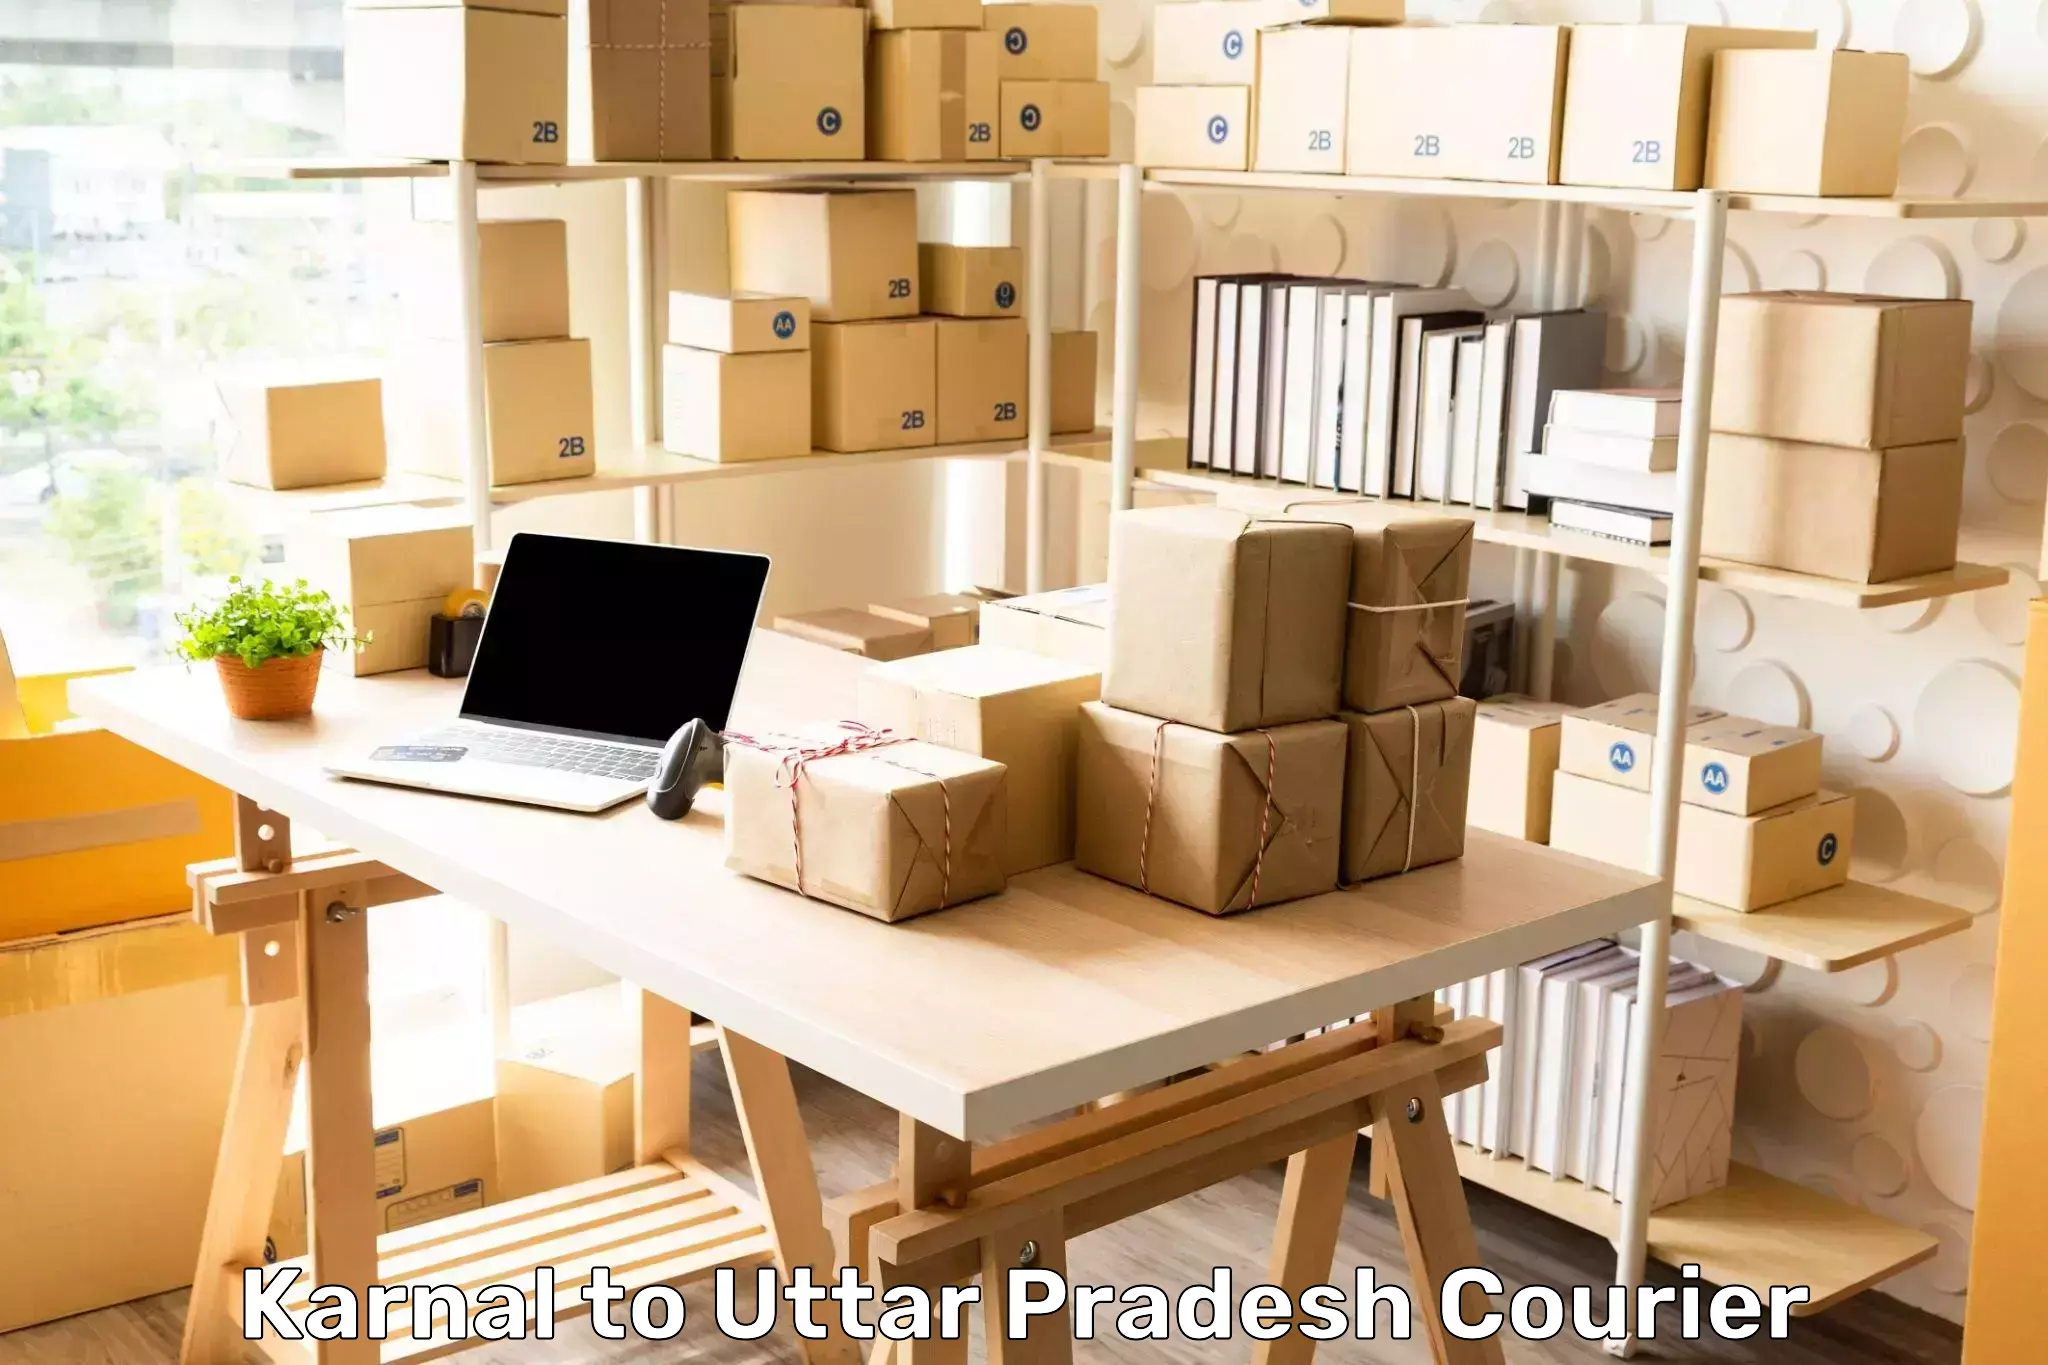 Subscription-based courier Karnal to Mahasi